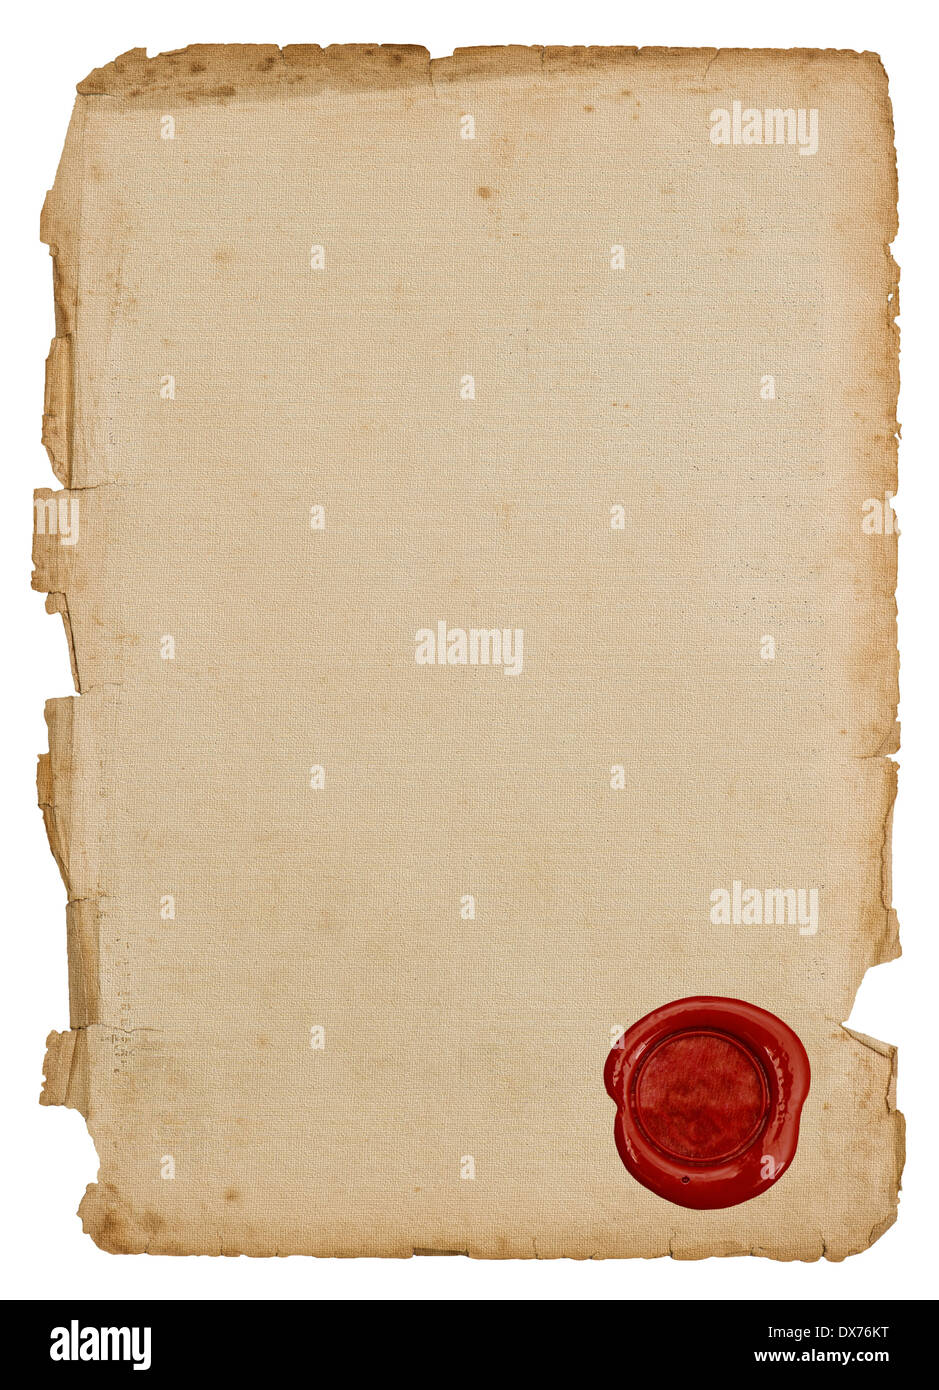 https://c8.alamy.com/comp/DX76KT/textured-antique-paper-sheet-with-red-wax-seal-isolated-on-white-background-DX76KT.jpg